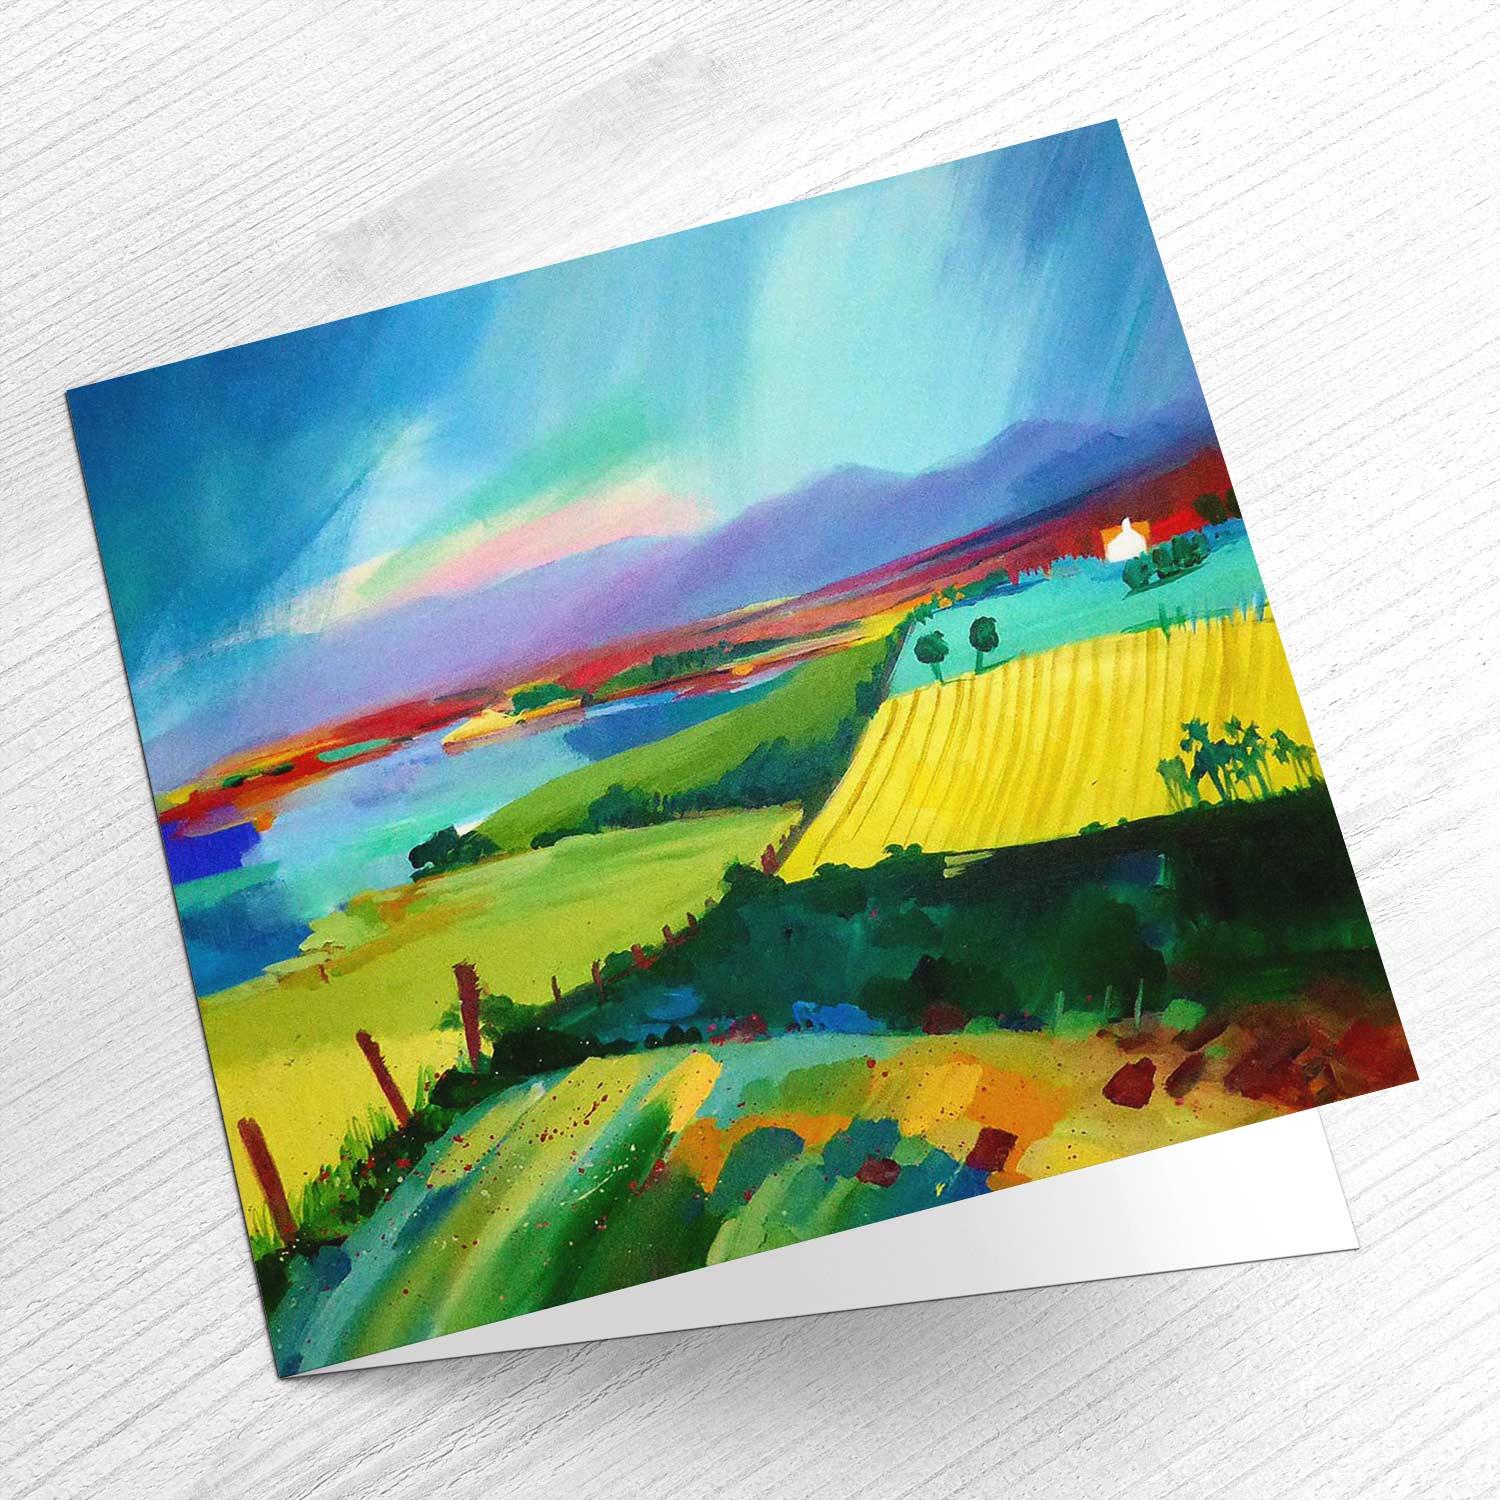 View across Insh Marshes Greeting Card from an original painting by artist Ann Vastano